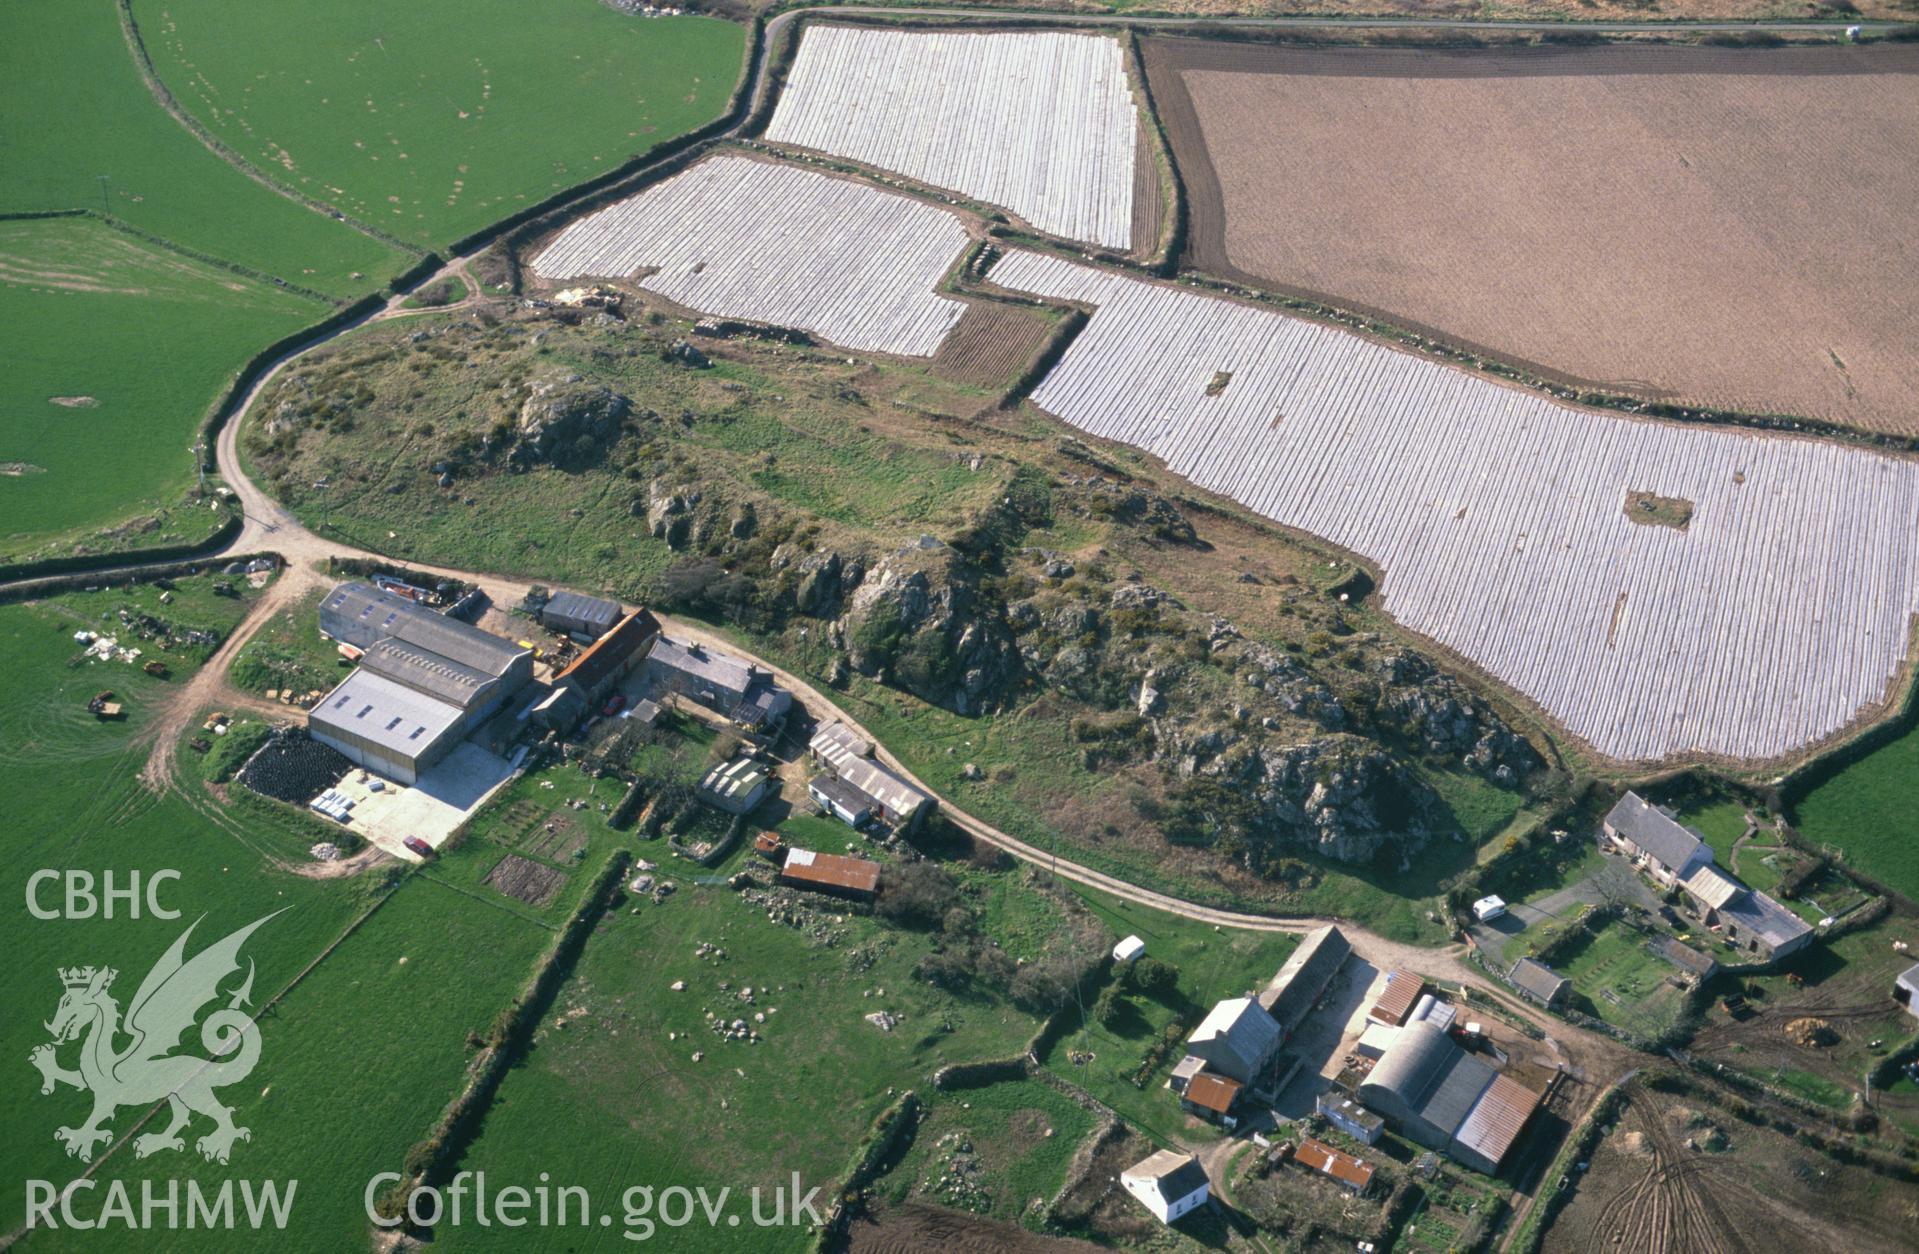 RCAHMW colour slide oblique aerial photograph of Clegyr Boia, St Davids, taken on 24/03/1991 by CR Musson